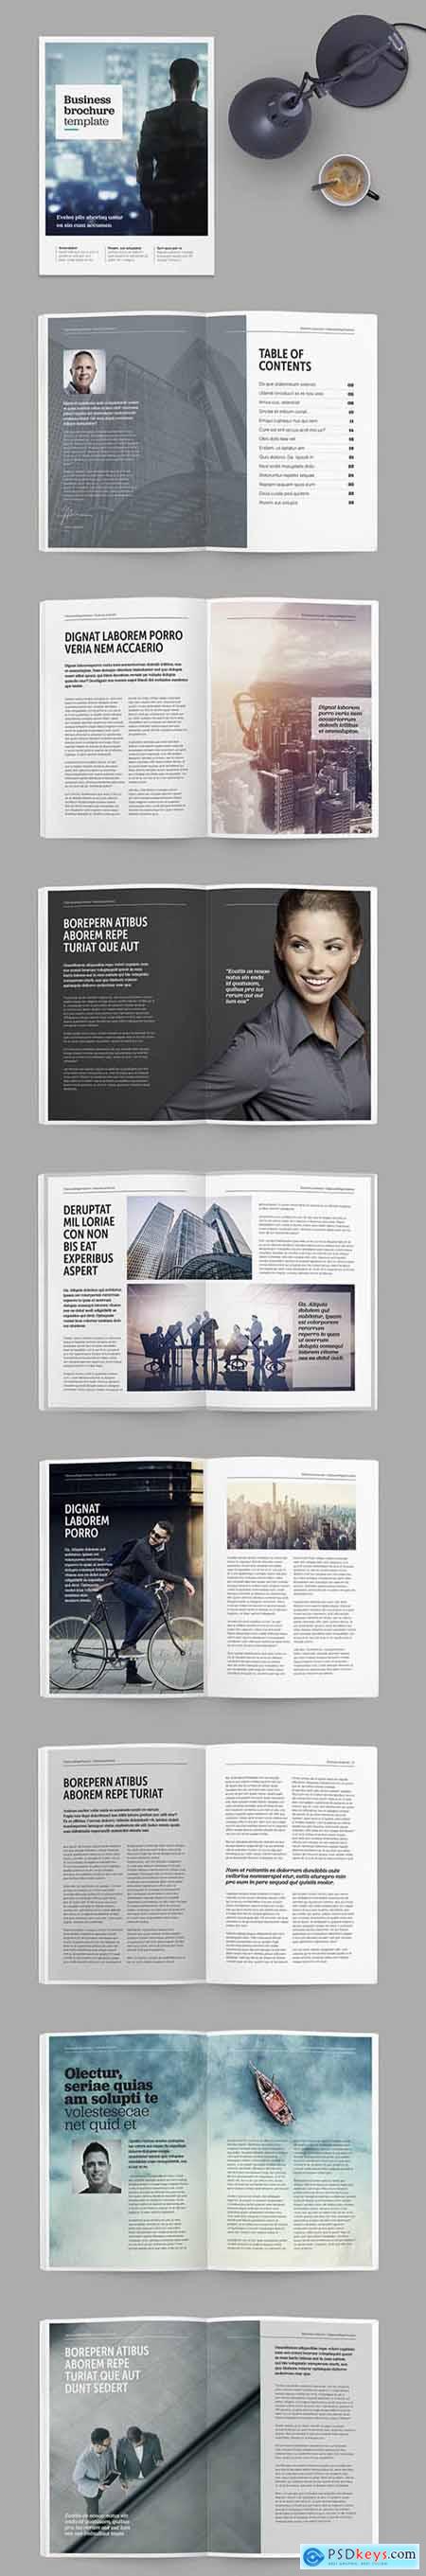 Brochure Magazine Layout with Bold Title Treatments 222543725